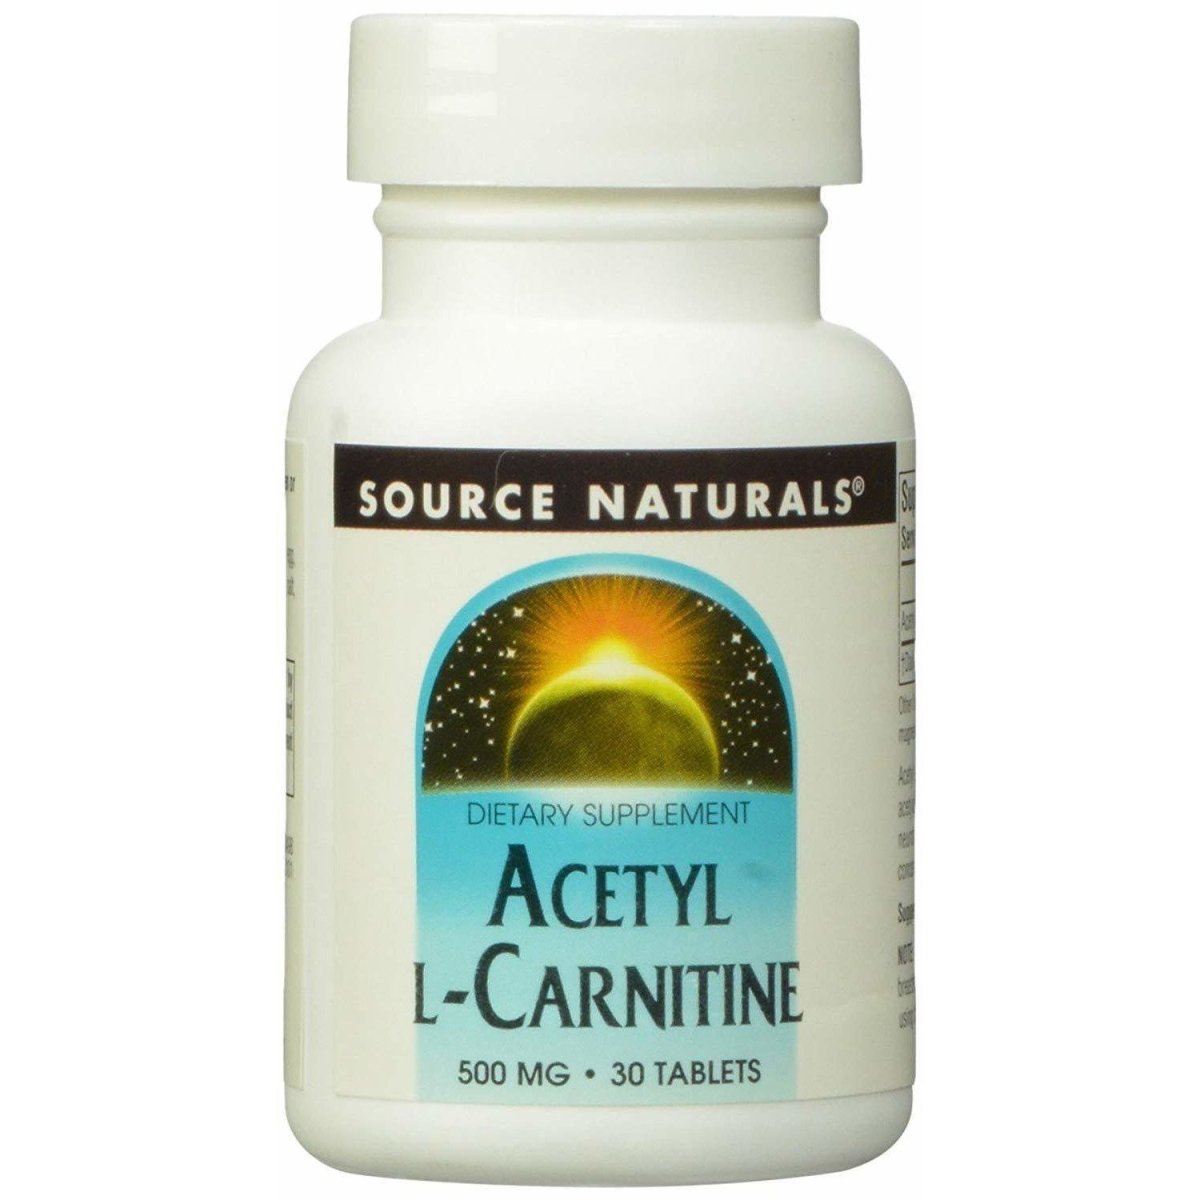 Source Naturals Acetyl L-Carnitine 500mg, 30 Tablets